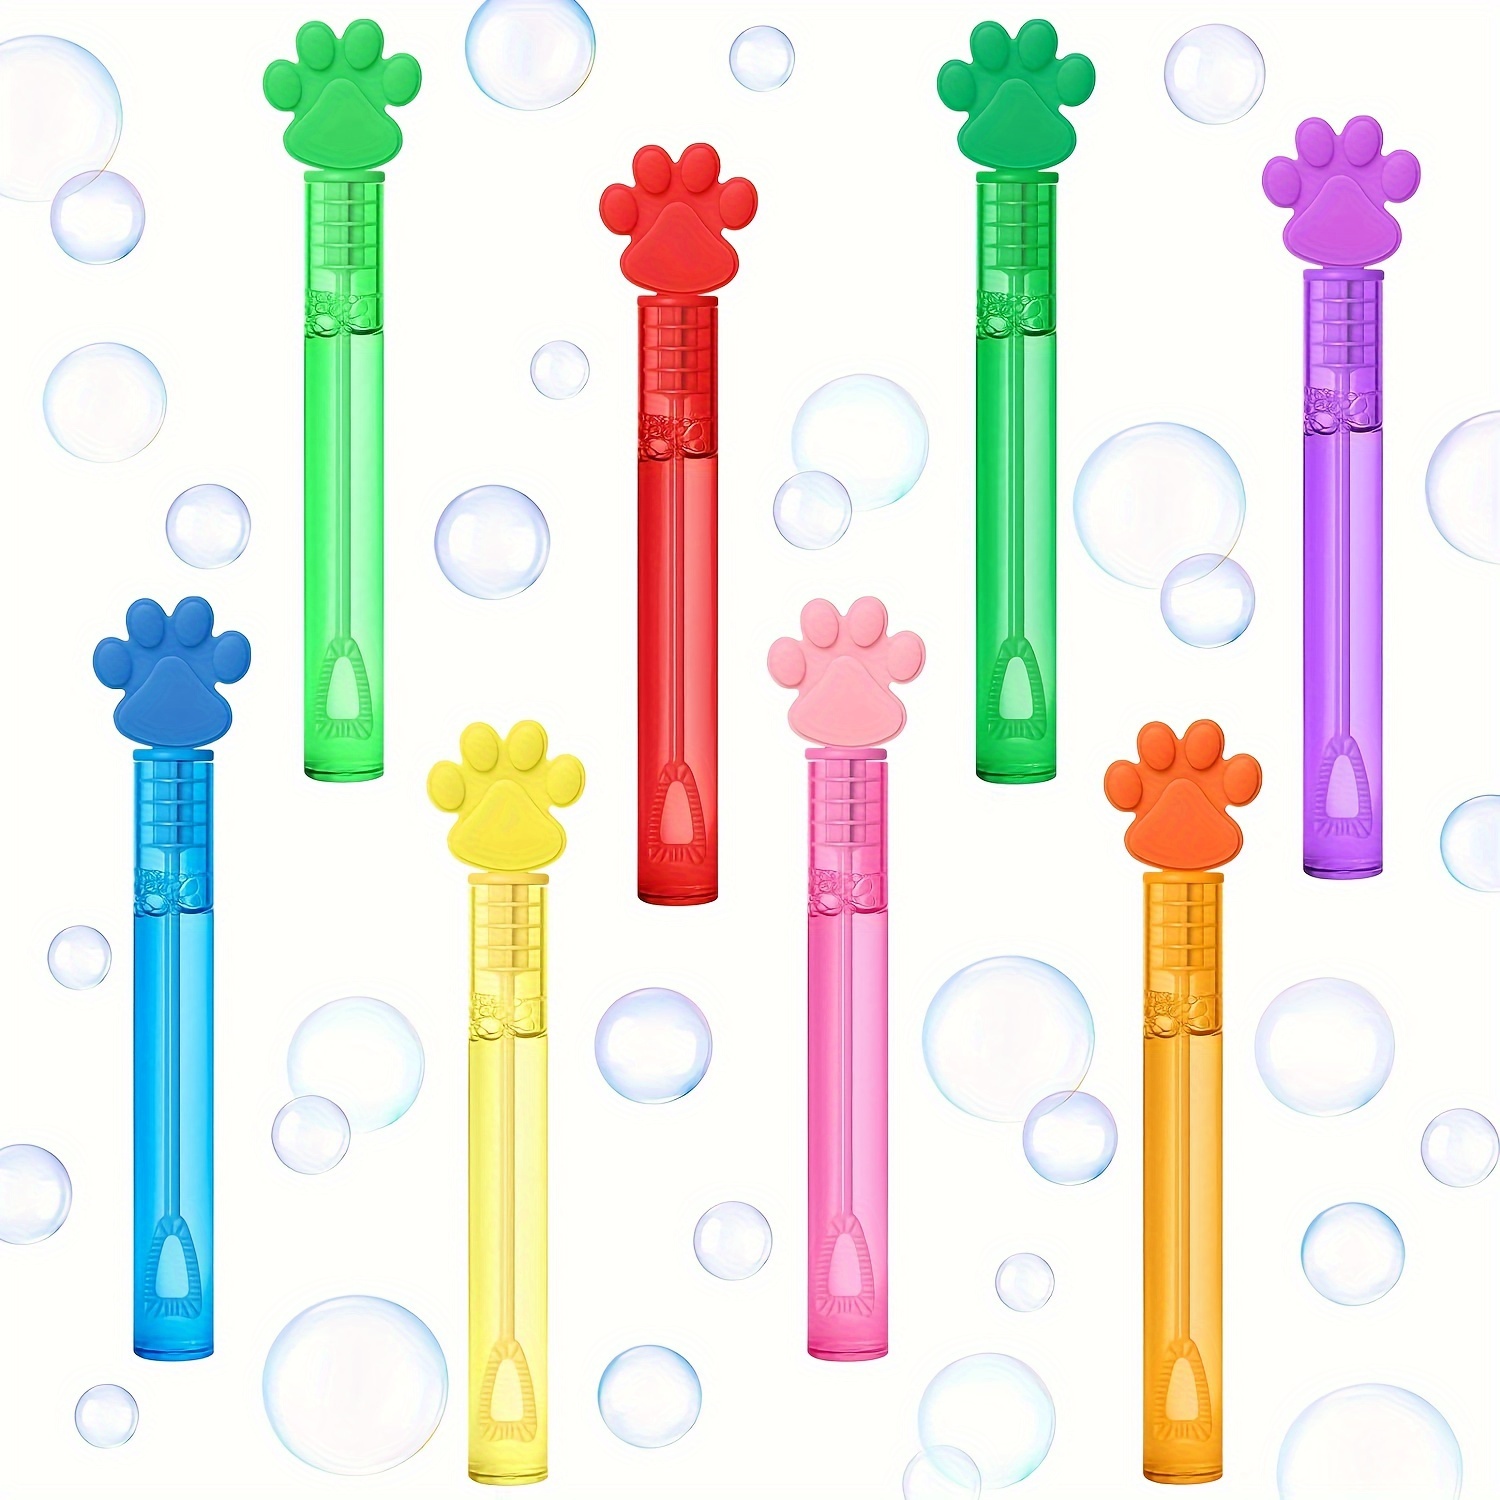 

24pcs Paw Party Favors Bubble Wands For Kids, Paw Print Mini Bubbles Wand Toys, Patrol For Pet Dog Puppy Pals Cat Birthday Party Supplies Goodie Gift Bag Stuffers Pinata Classroom Prizes